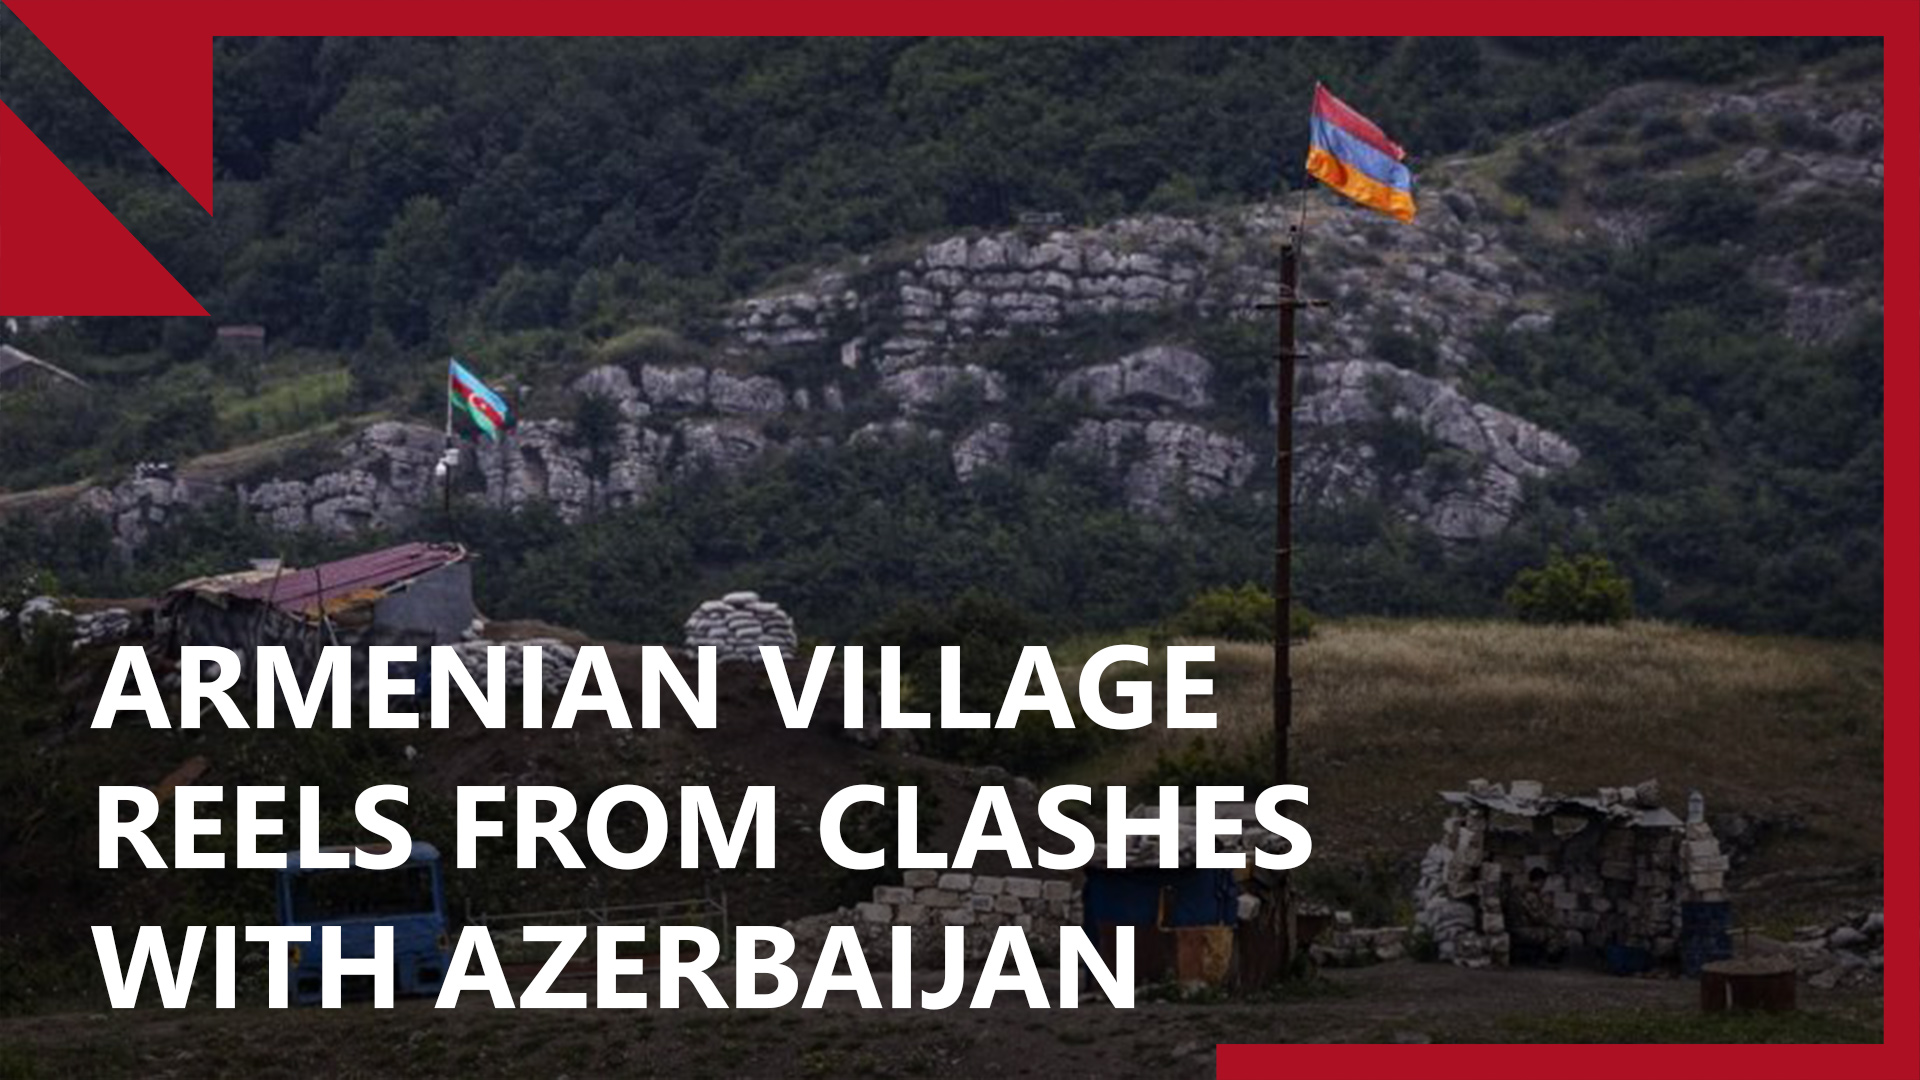 Armenia’s Tegh village reels from deadly clashes with Azerbaijan